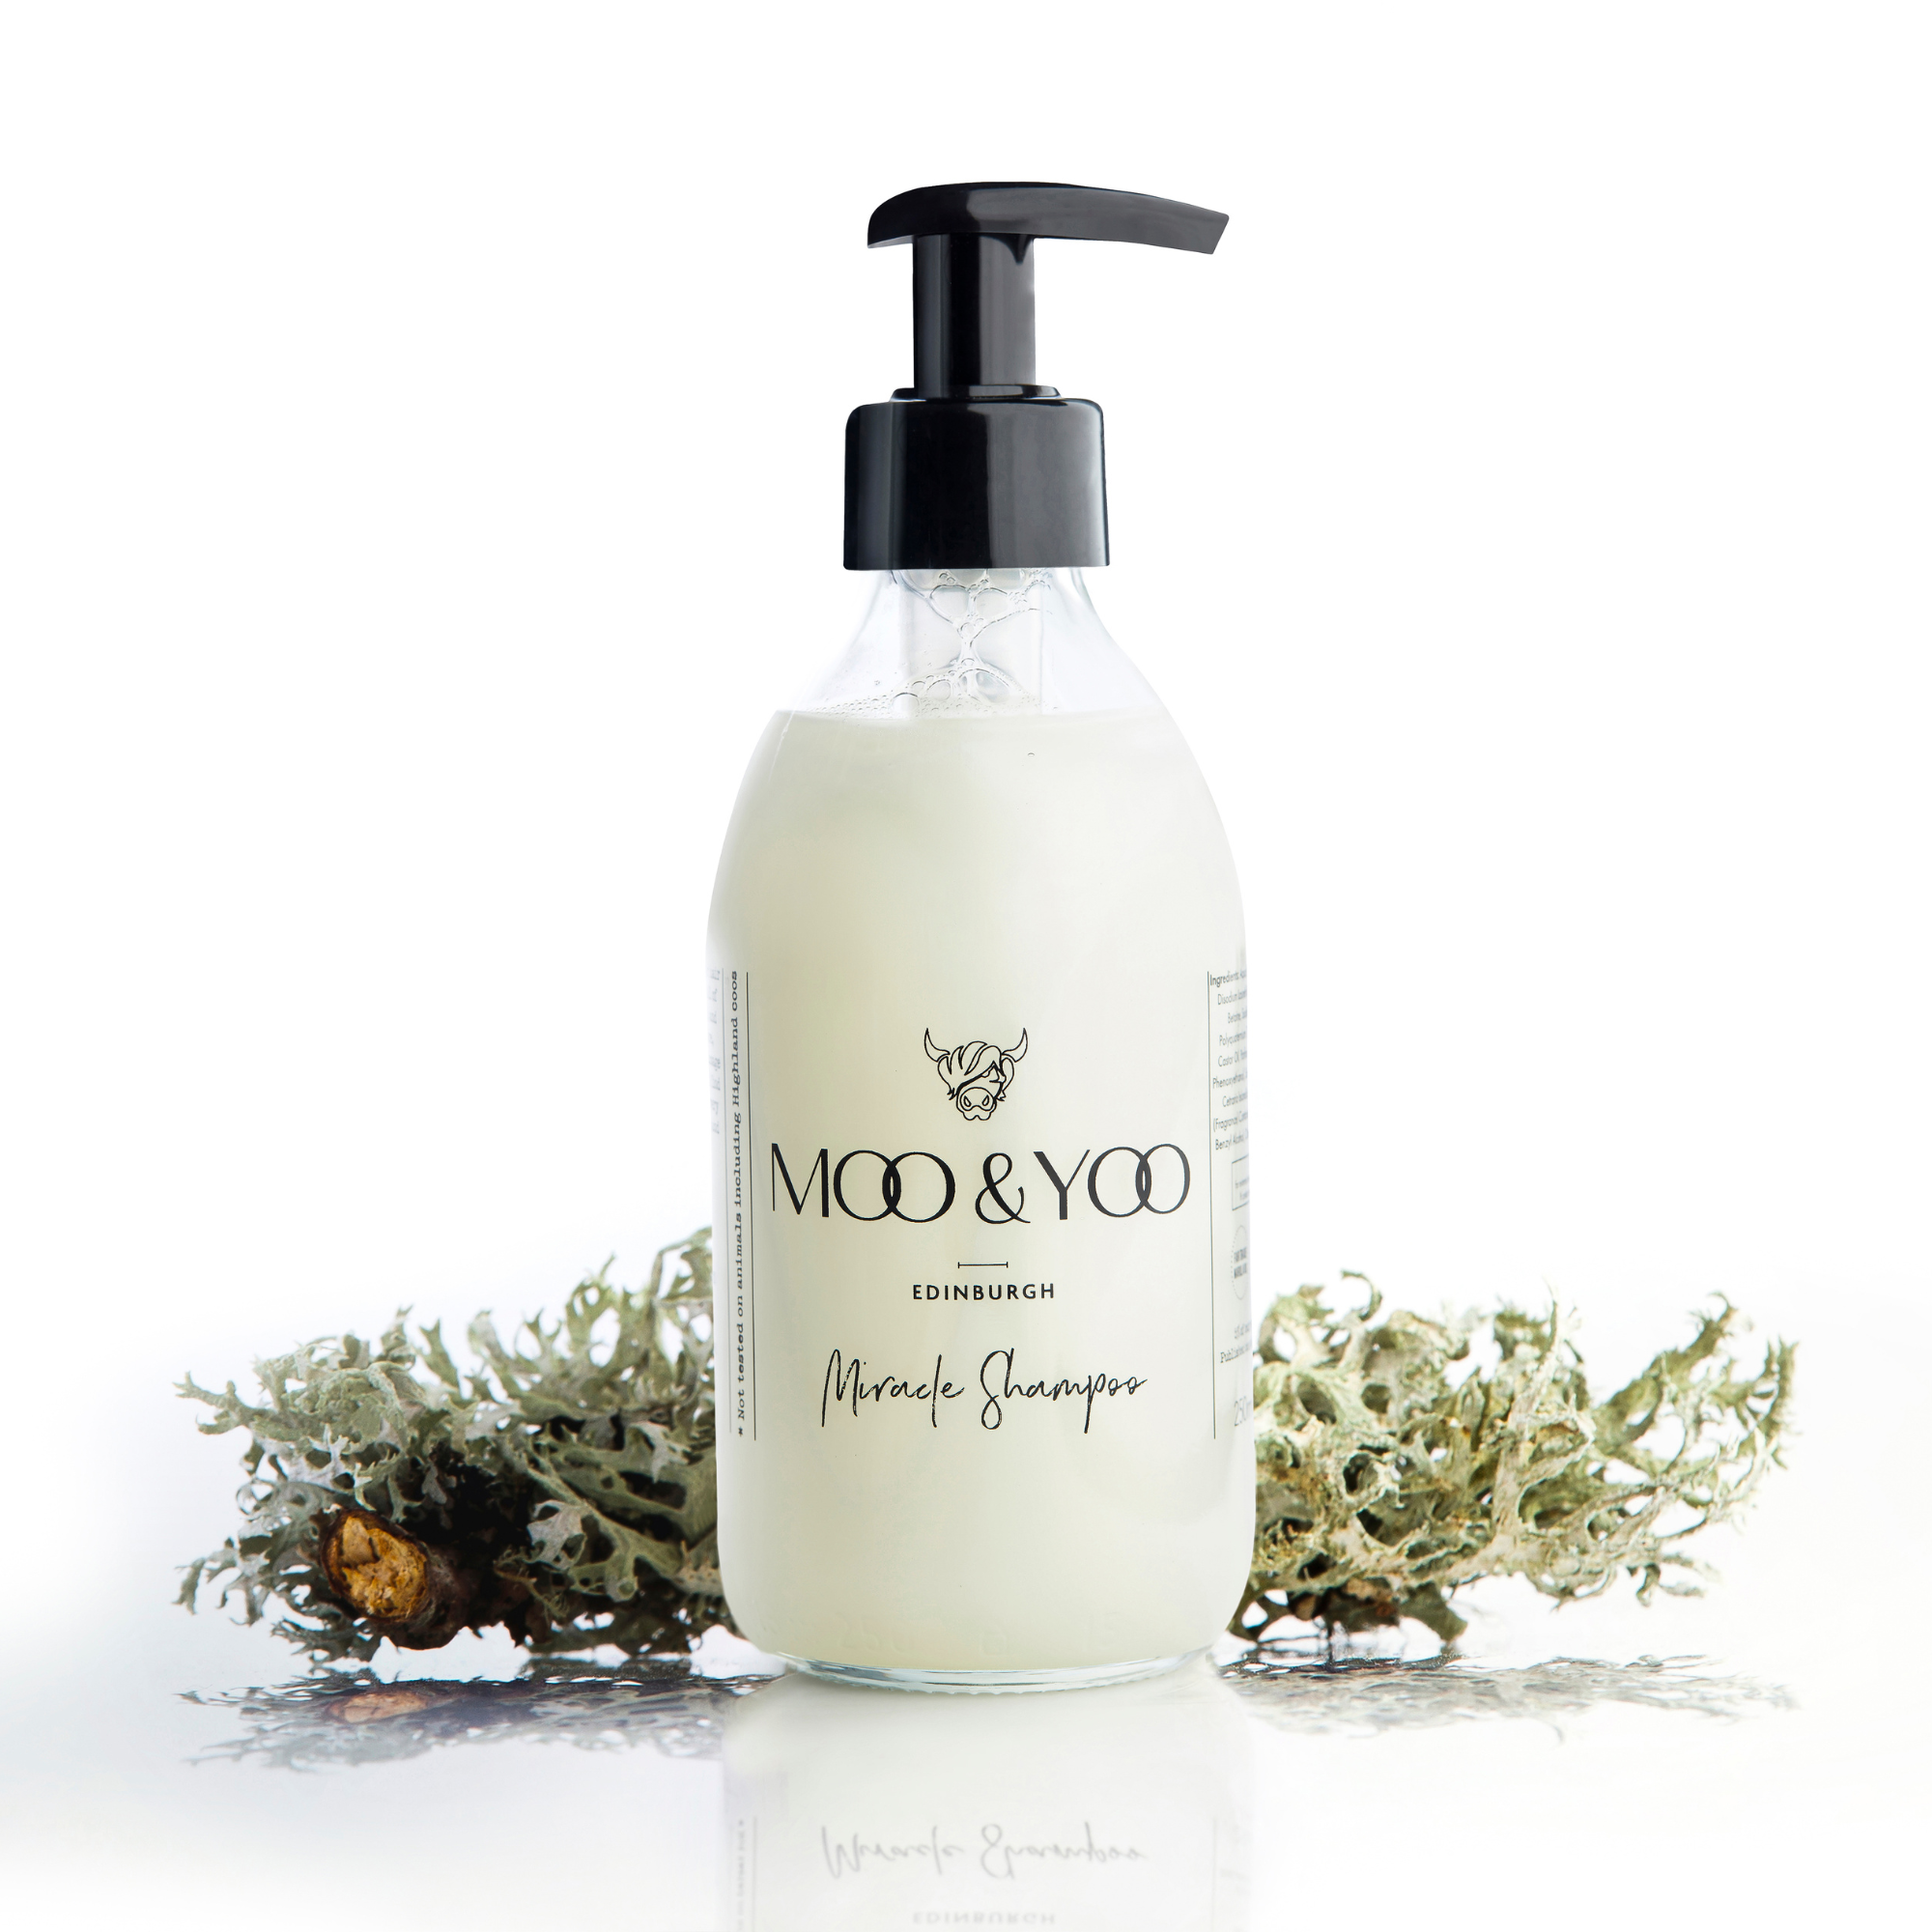 A glass bottle of Moo and Yoo Miracle shampoo with a pump on a white background with a sprig of Icelandic moss placed to each side.